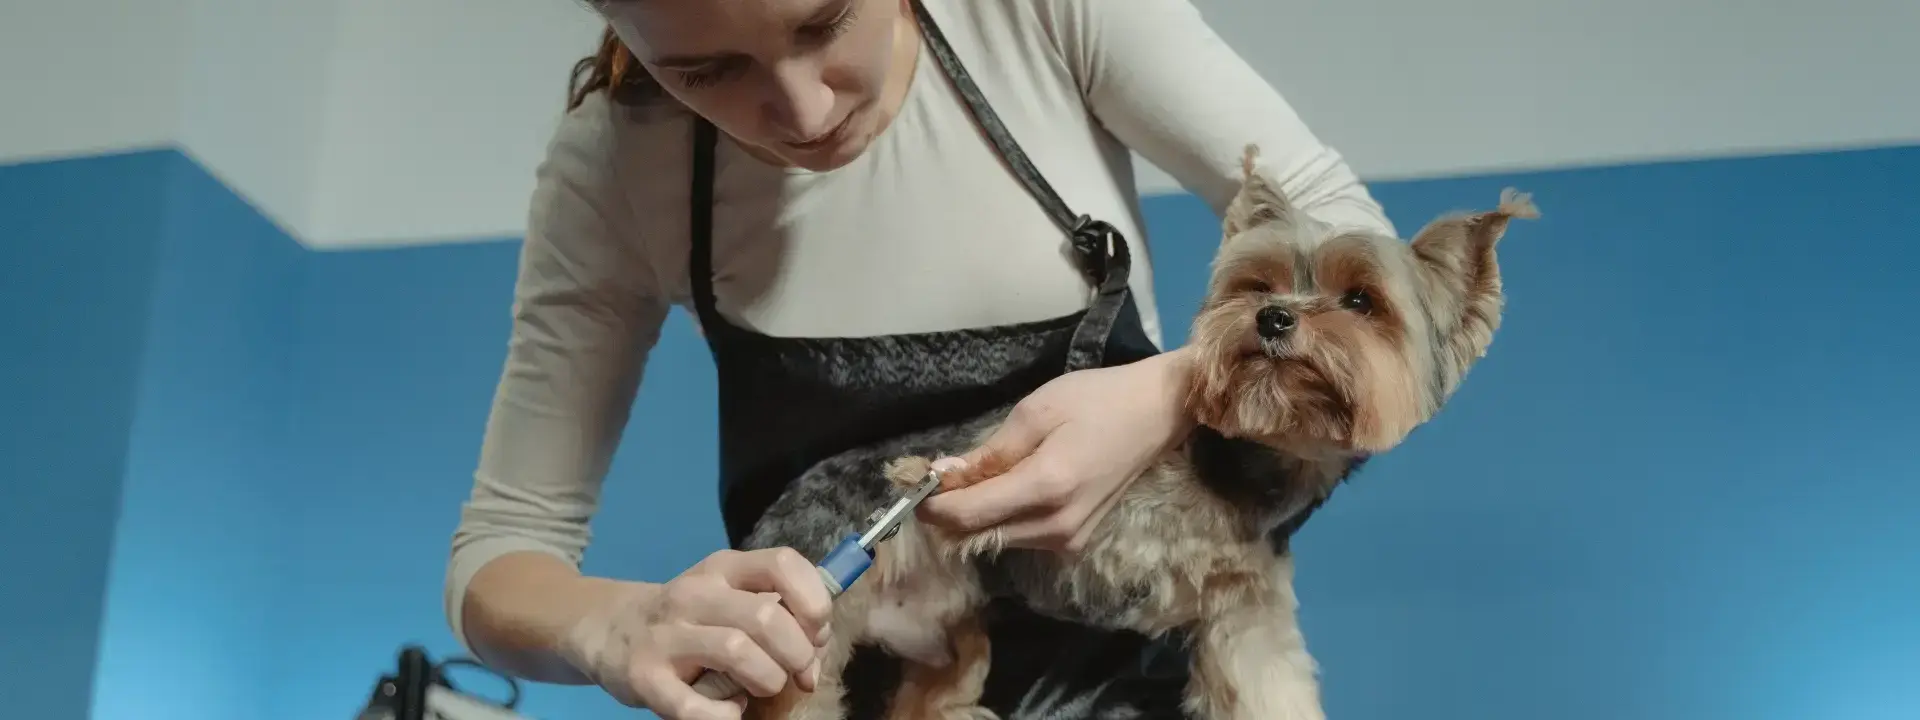 Pet Groomer Staff in Luxembourg